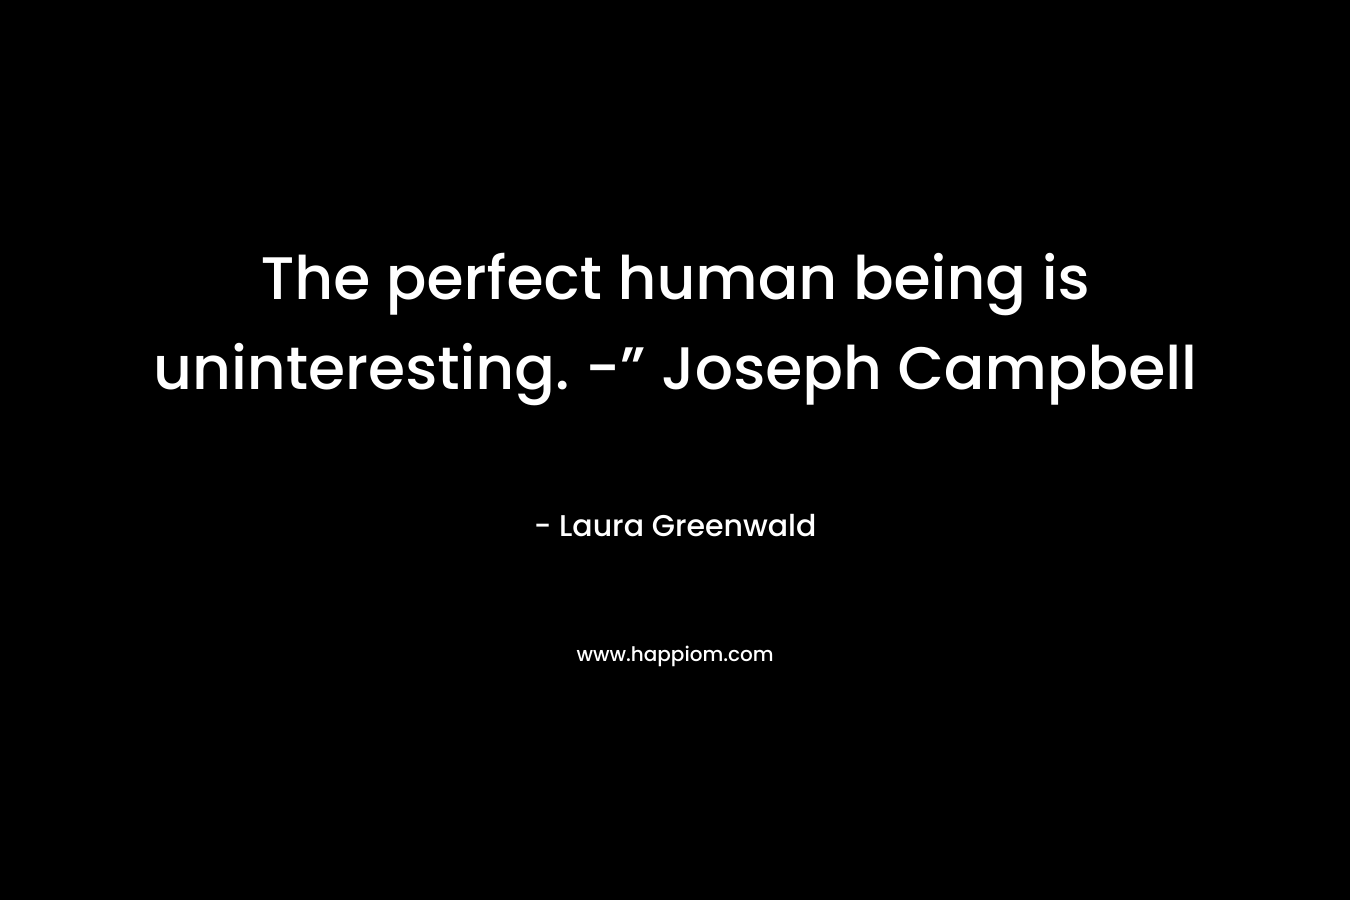 The perfect human being is uninteresting. -” Joseph Campbell